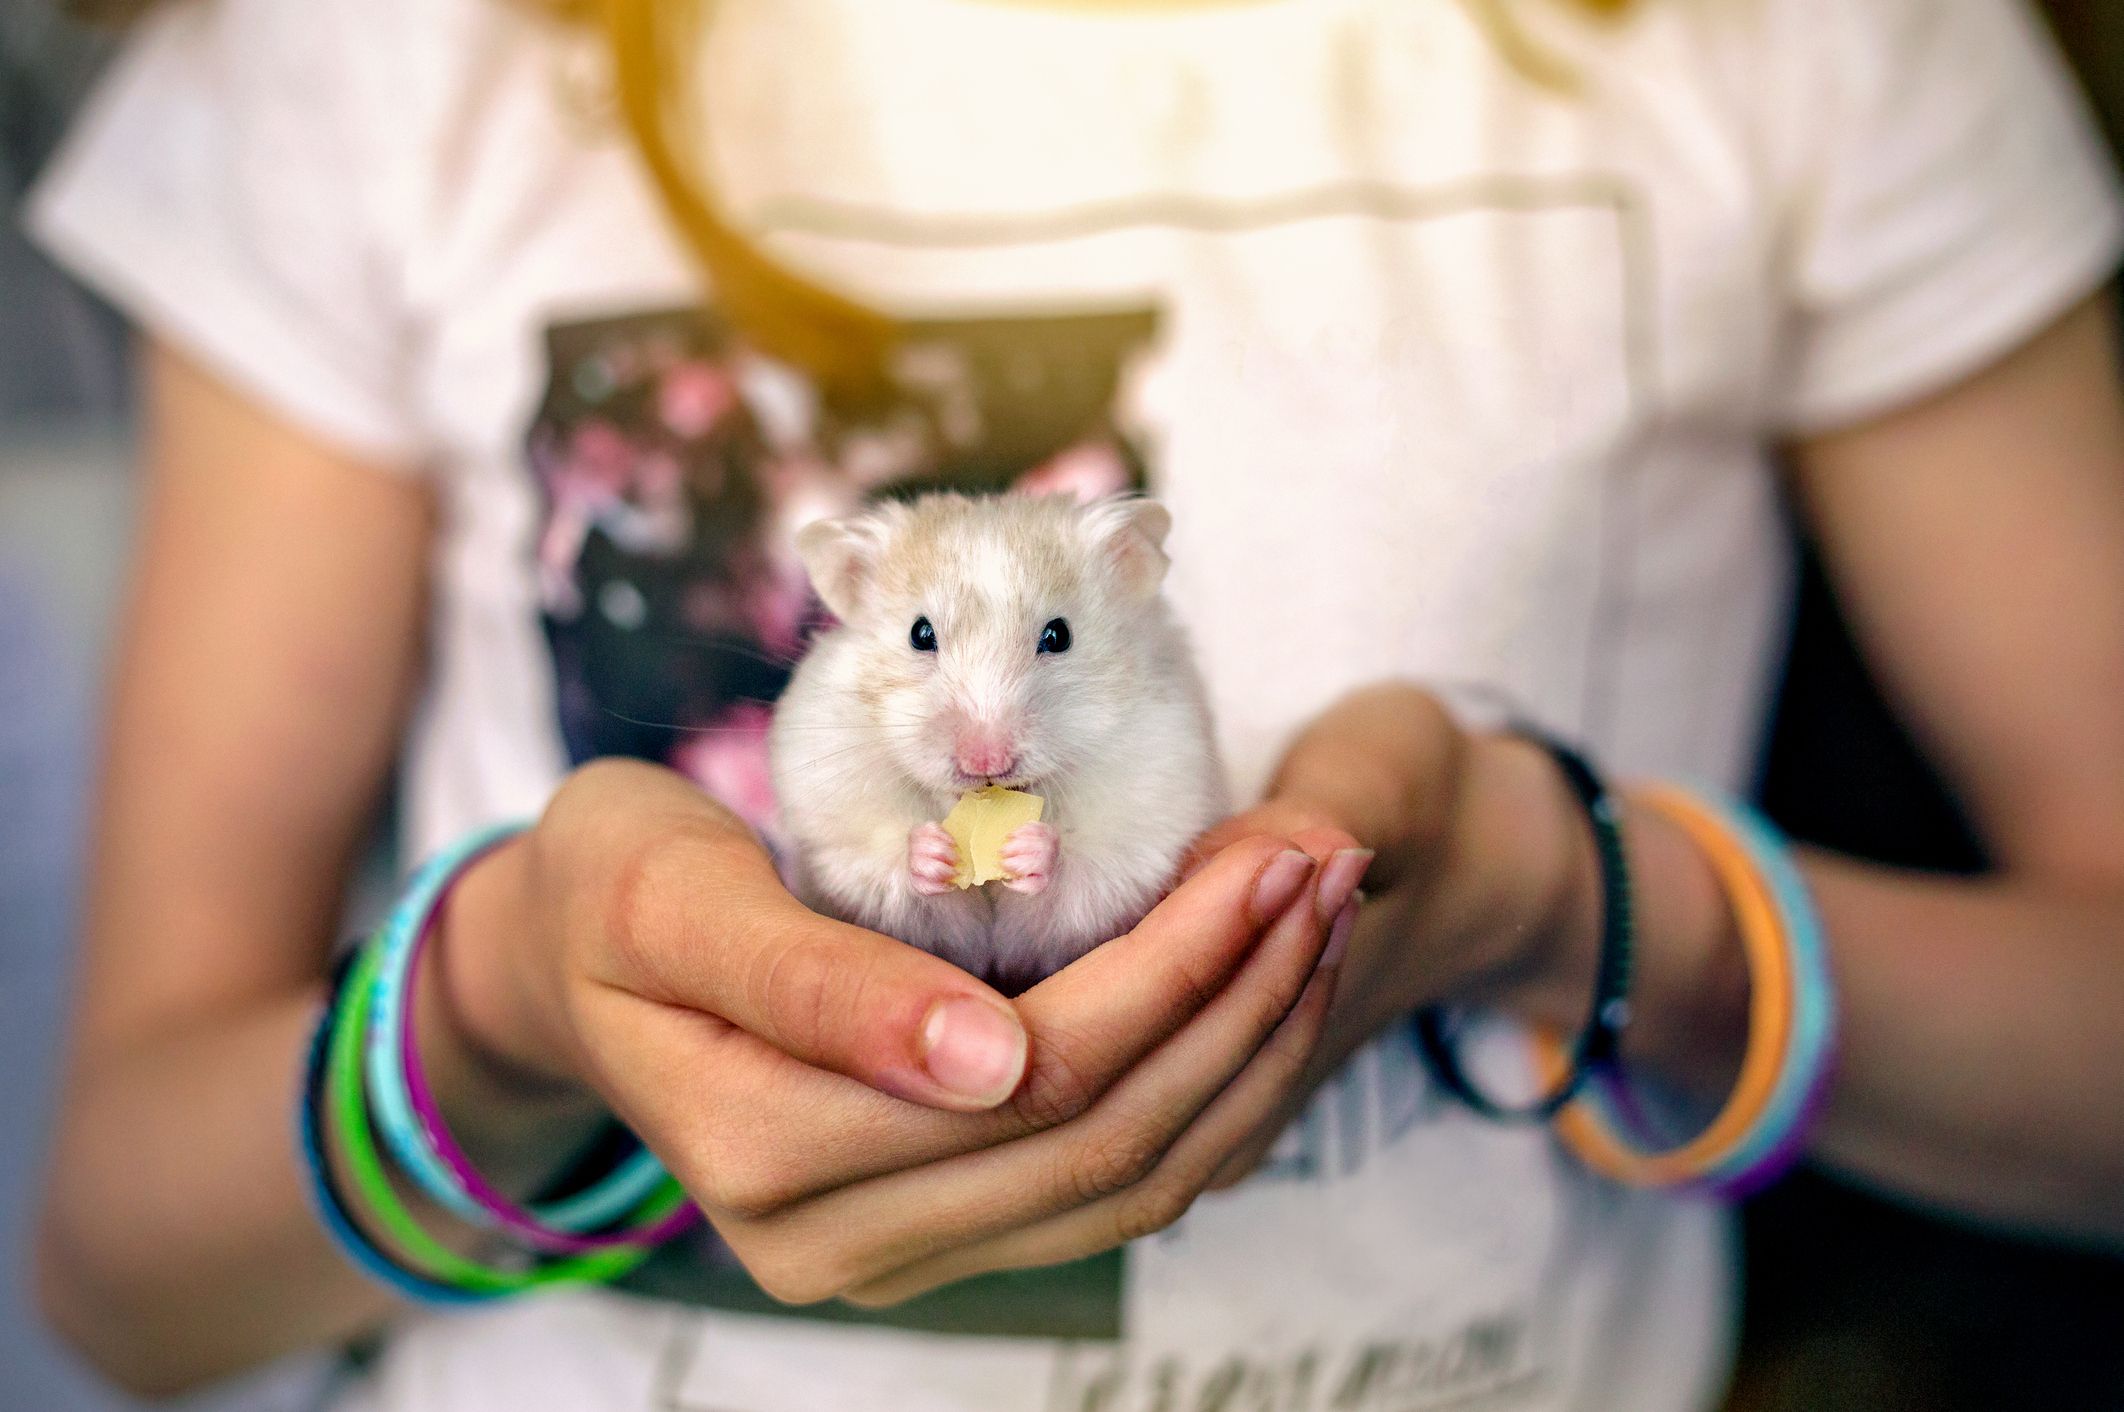 The Best Types of Hamsters Dwarf Hamster, Syrian Hamster pic